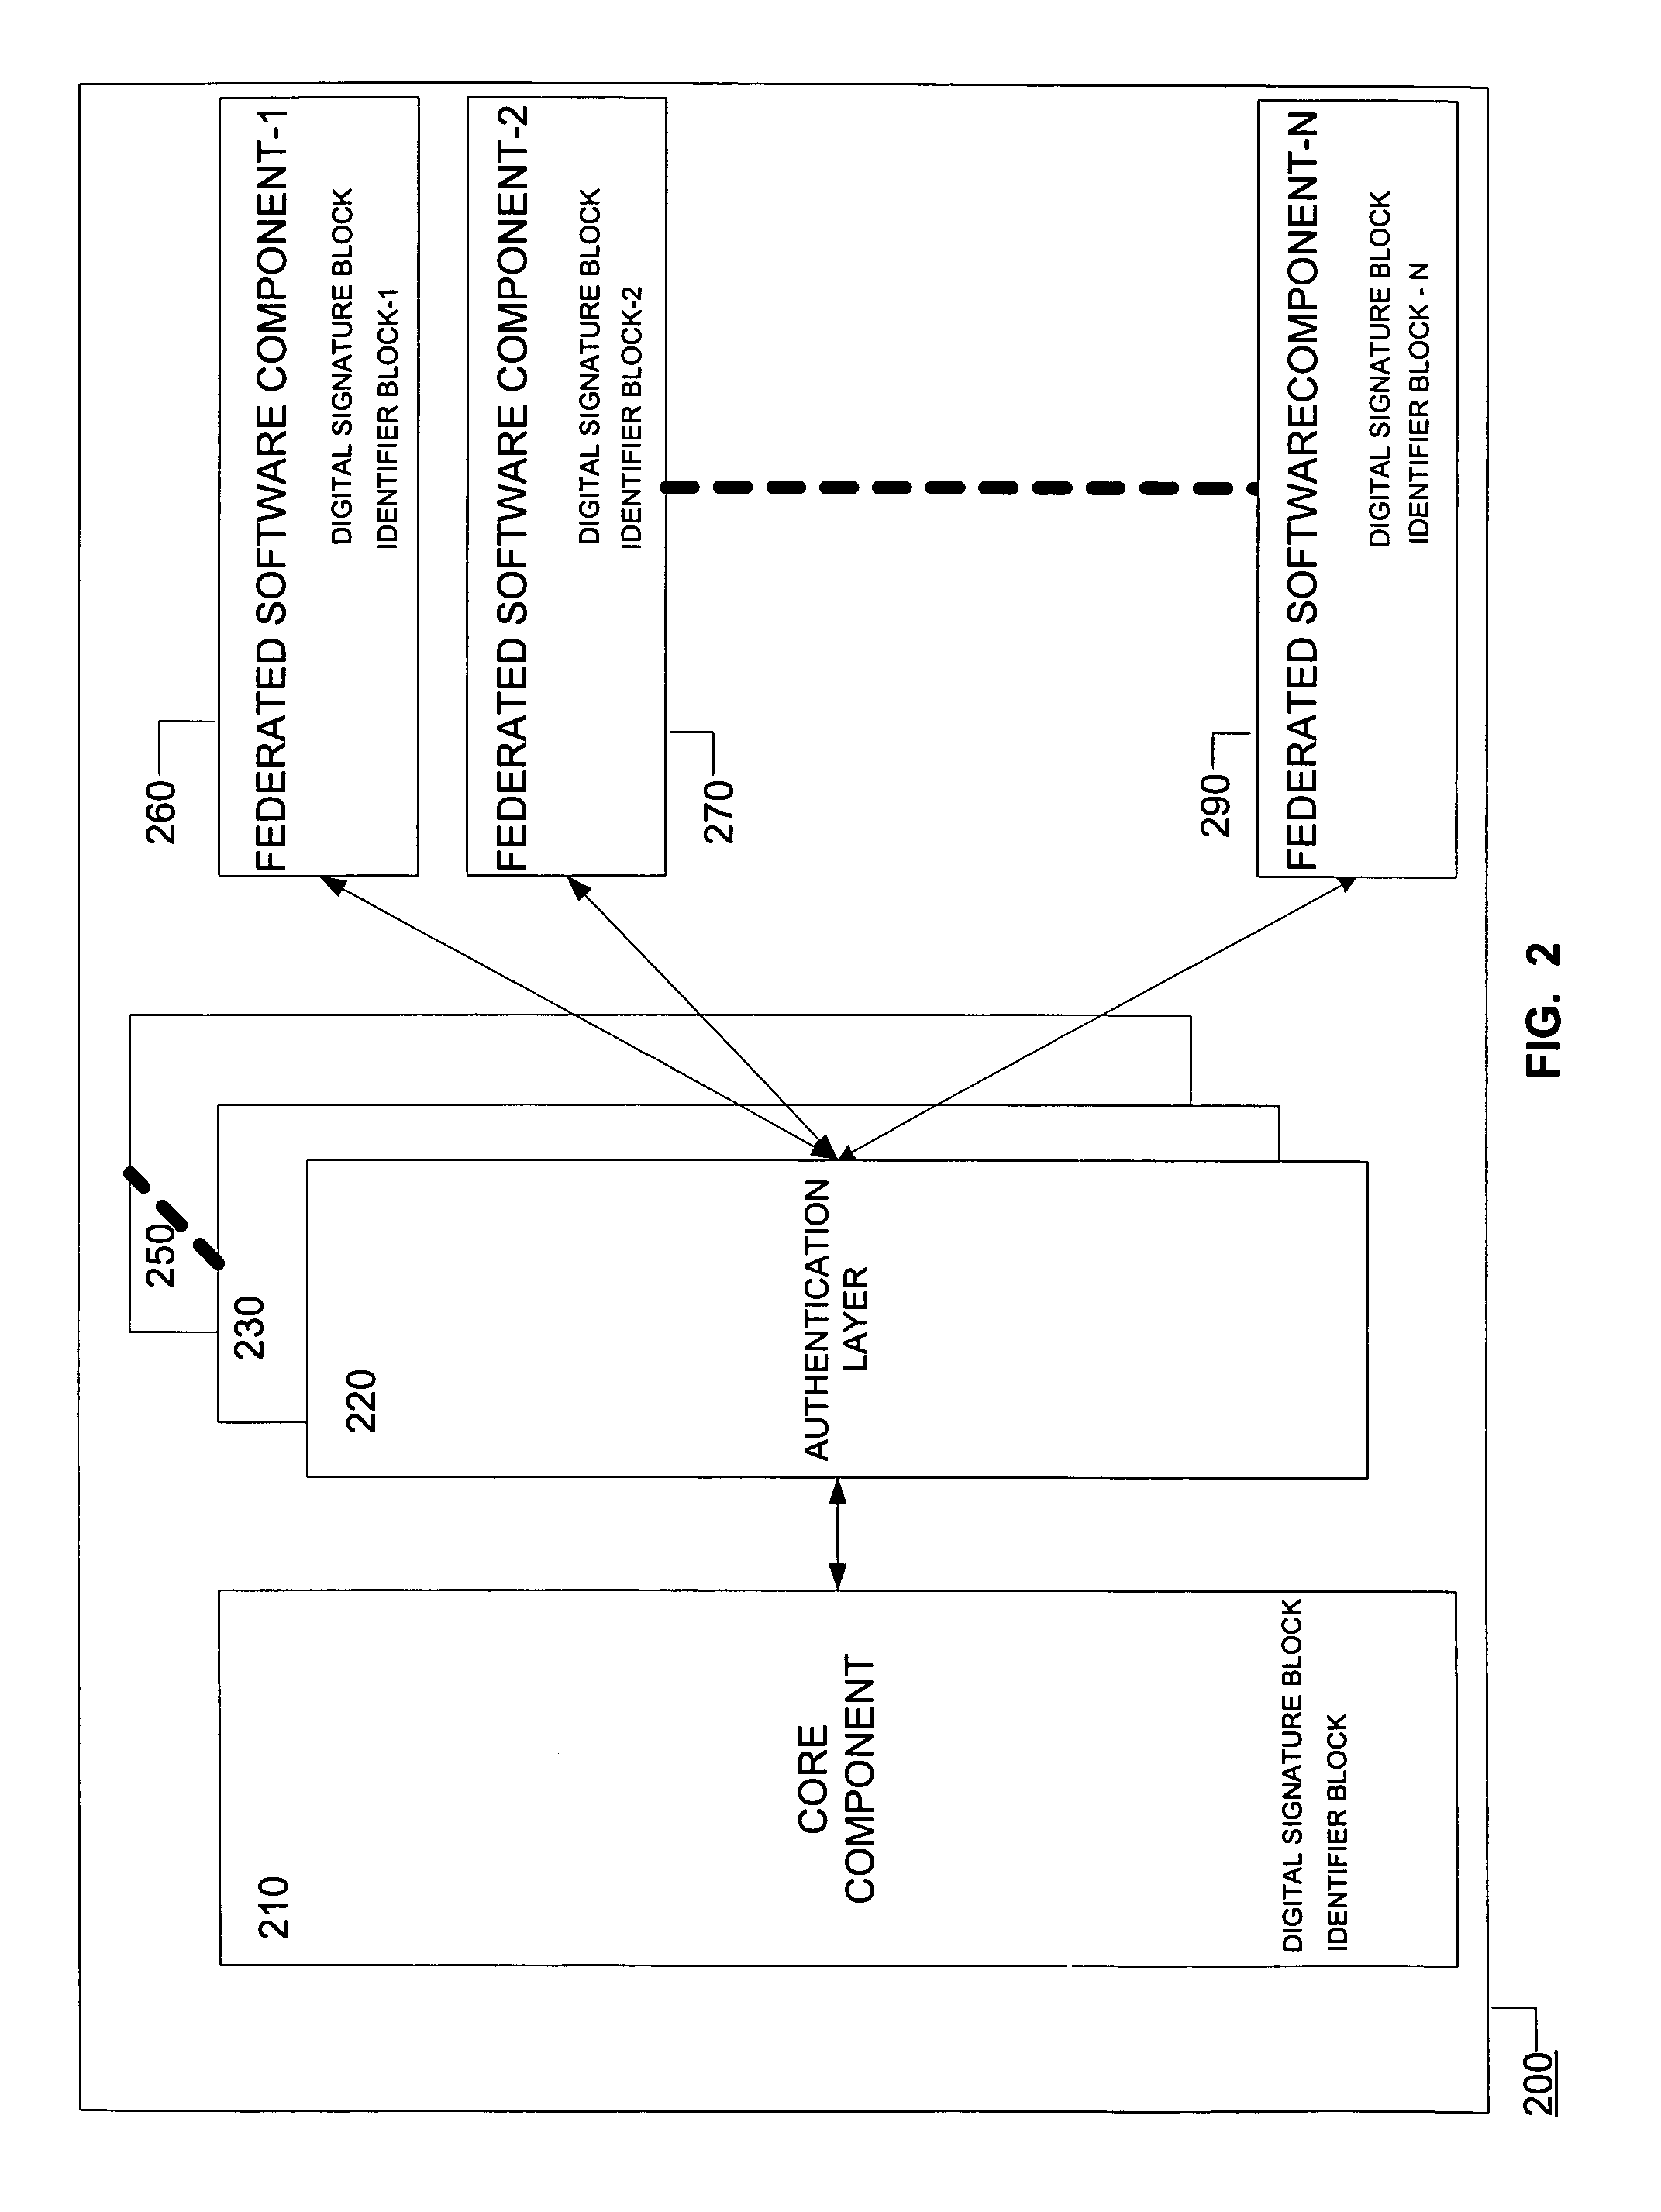 Systems and methods for distributing objects